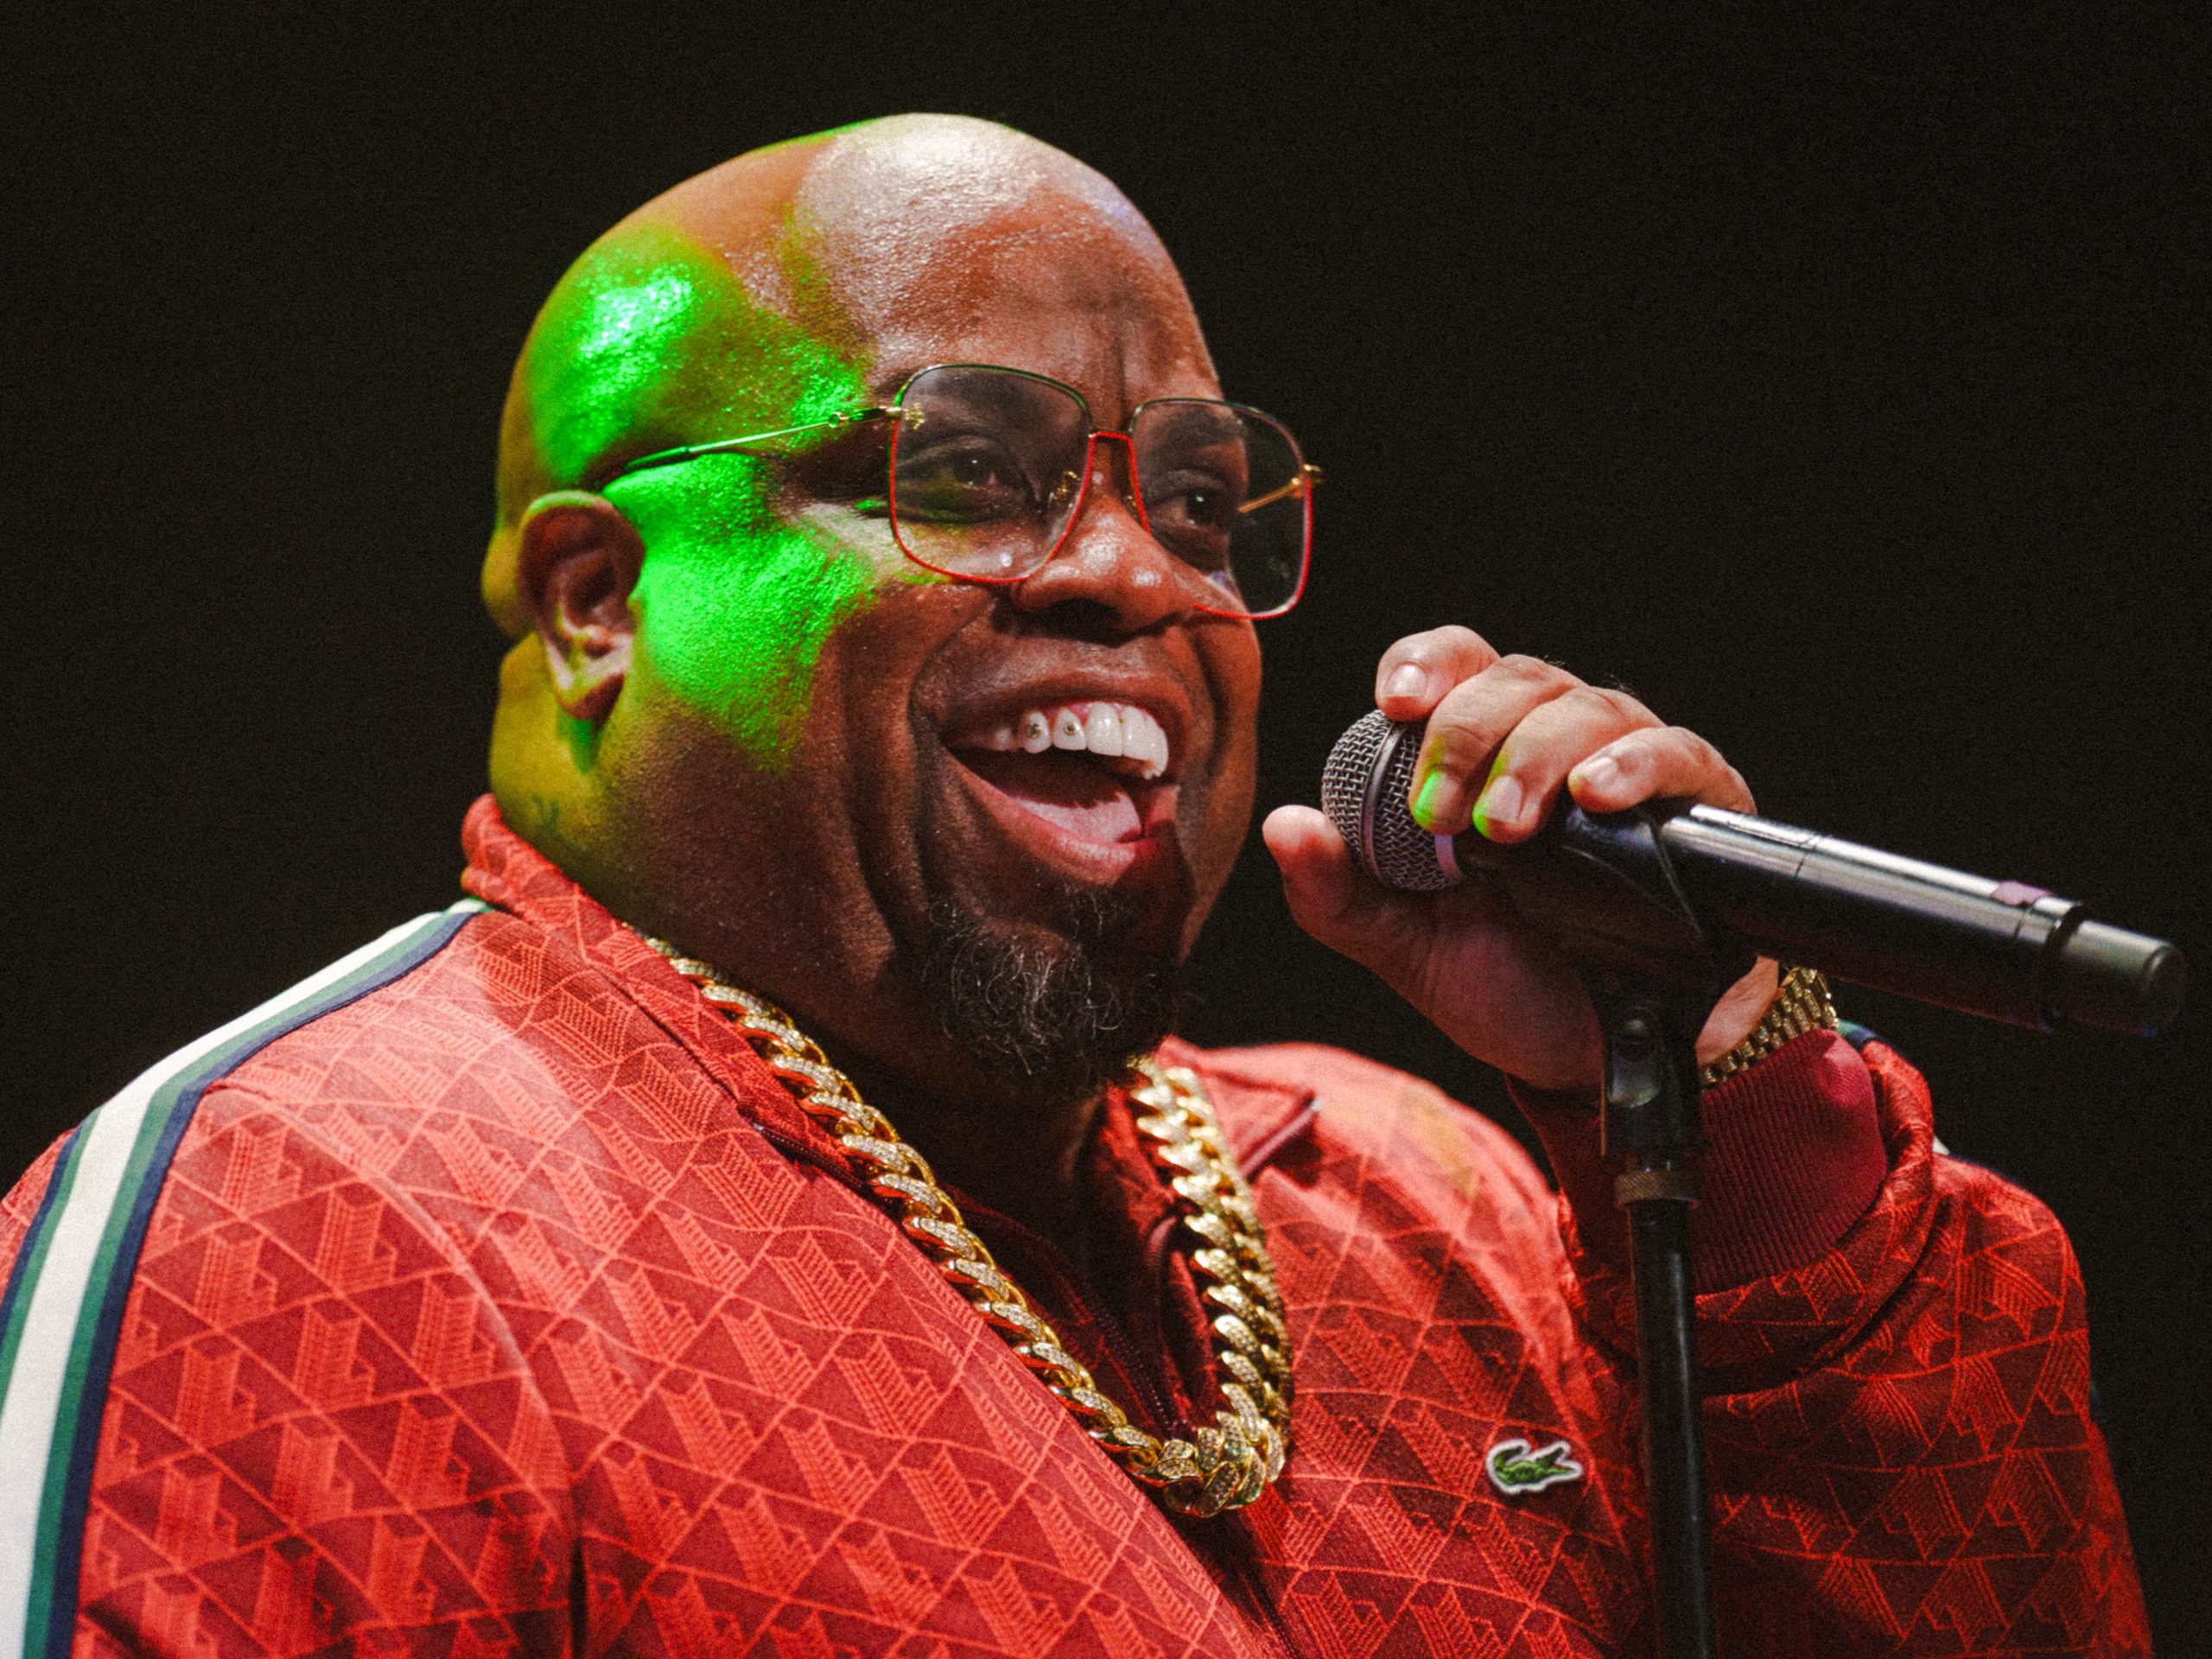 CeeLo Green (Photo/Video credit: Horace Braswell, Codec)